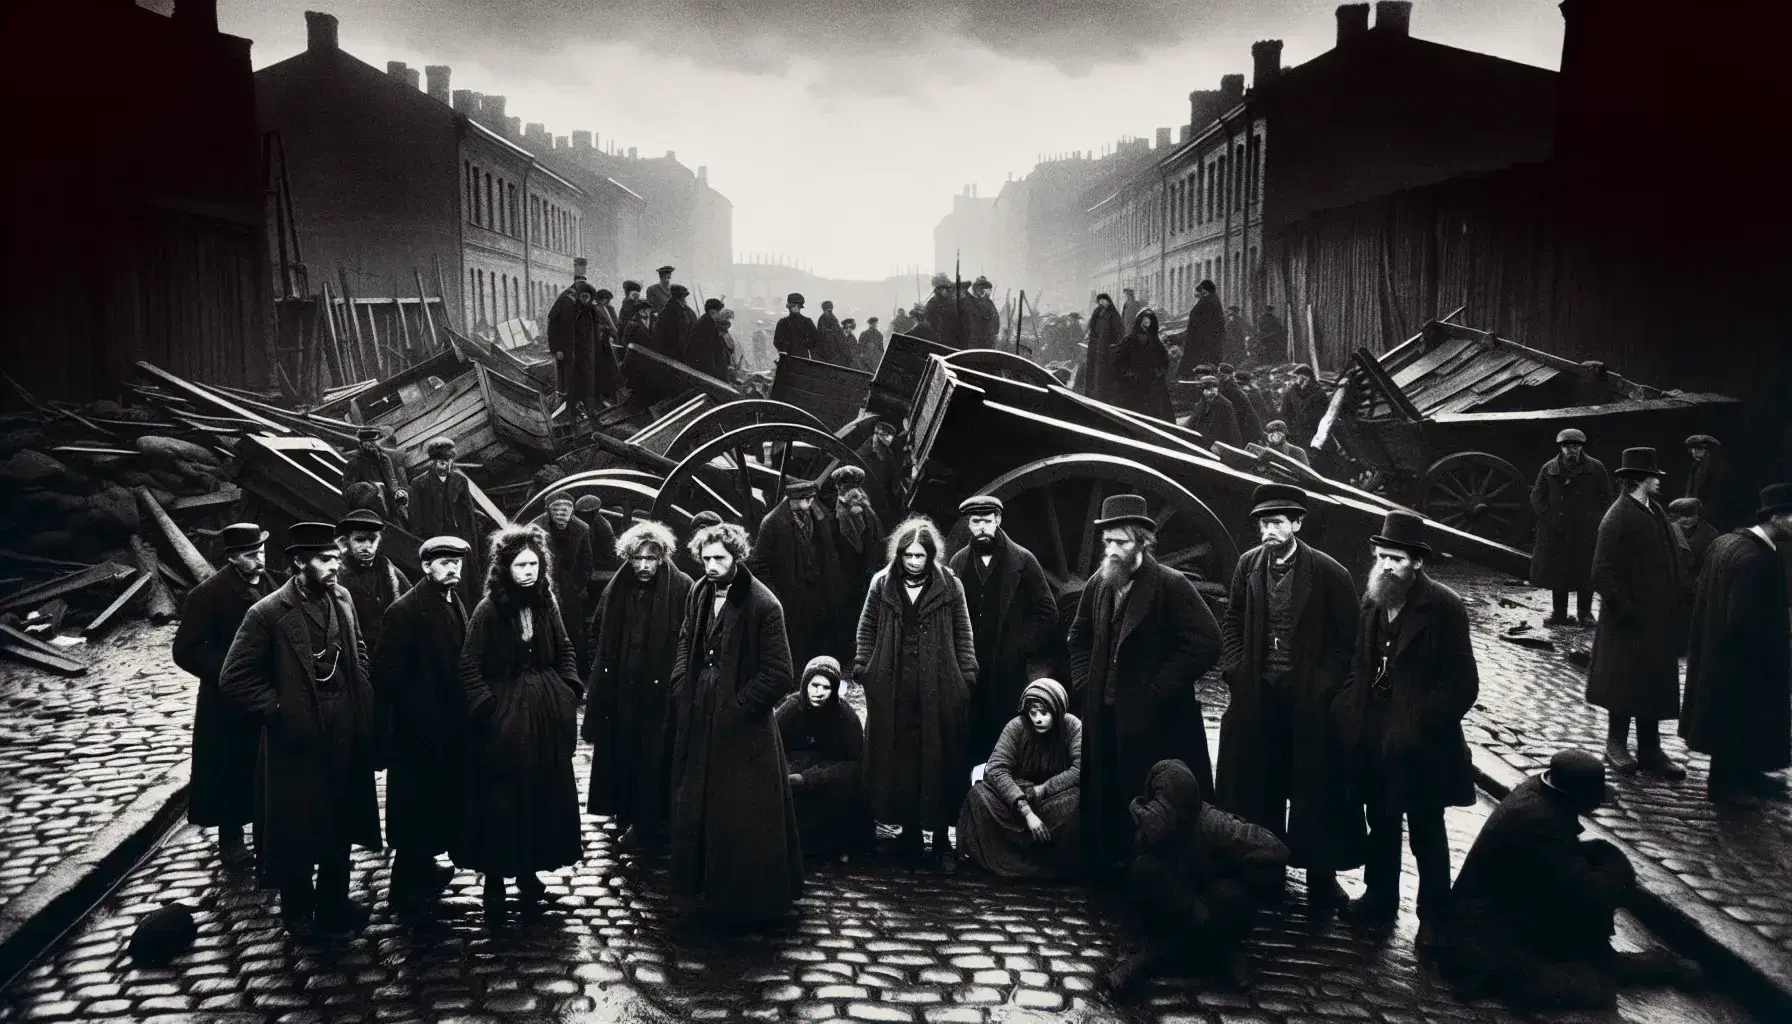 Early 20th-century black and white photo showing a group of solemn protesters with raised fists on a cobblestone street, barricades in the background.